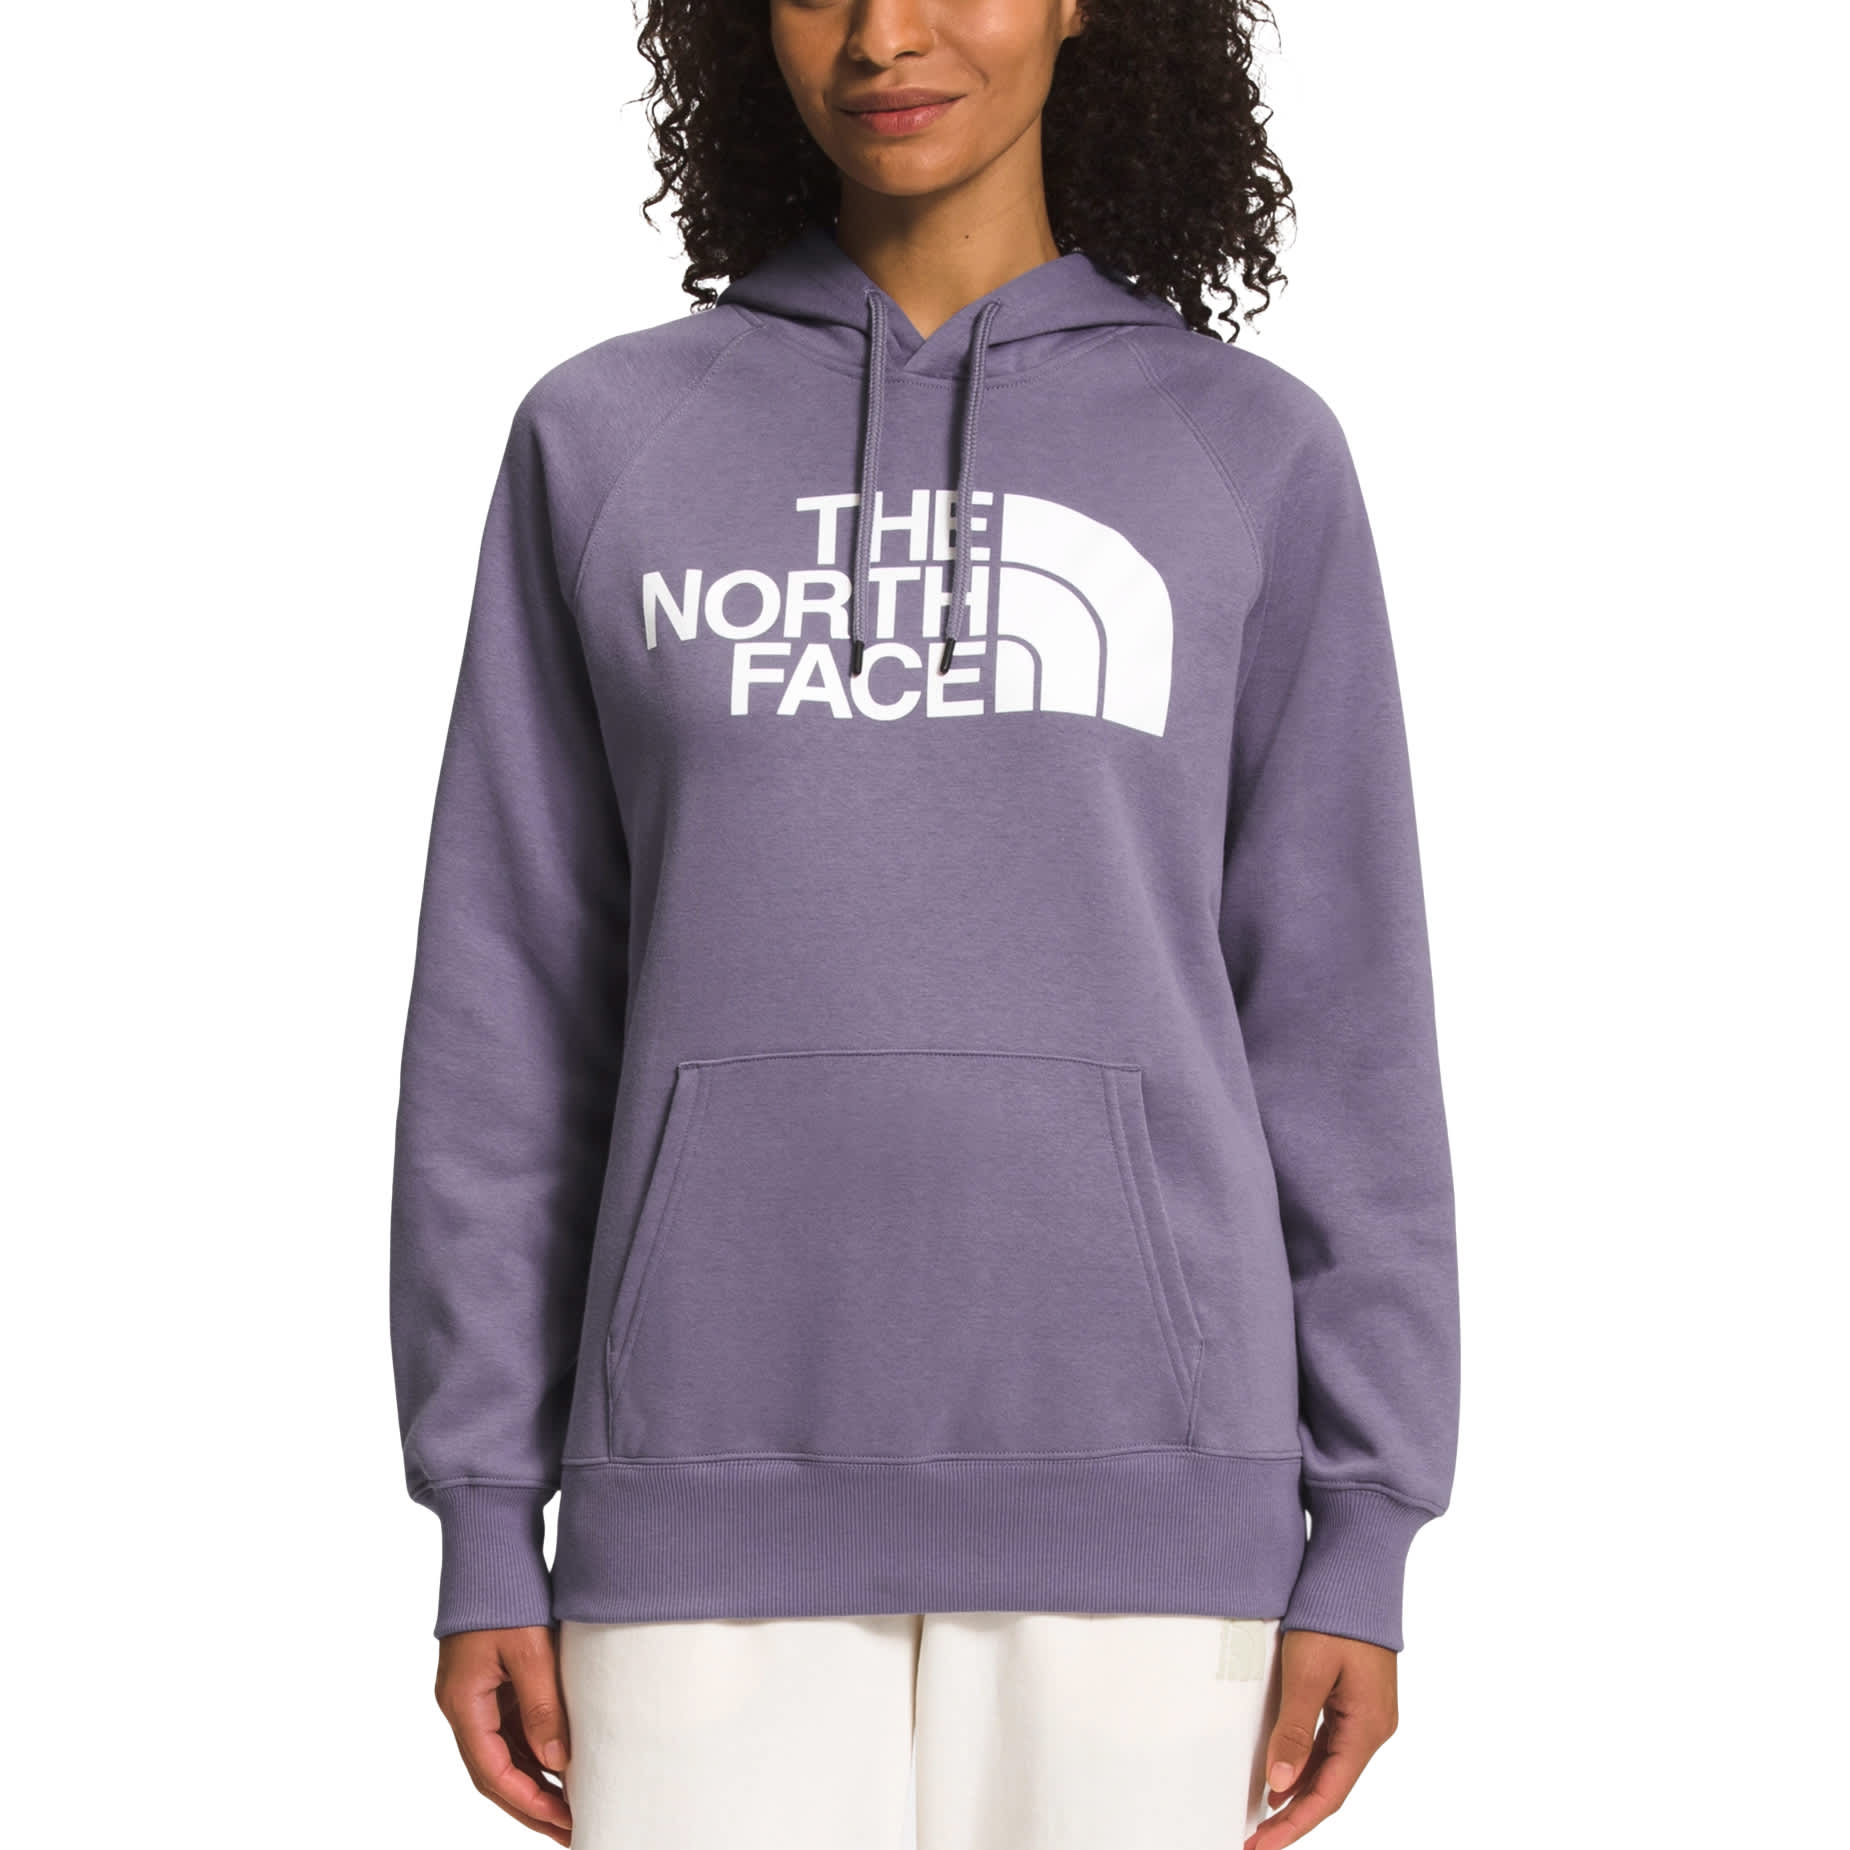 The North Face® Women’s Half Dome Hoodie